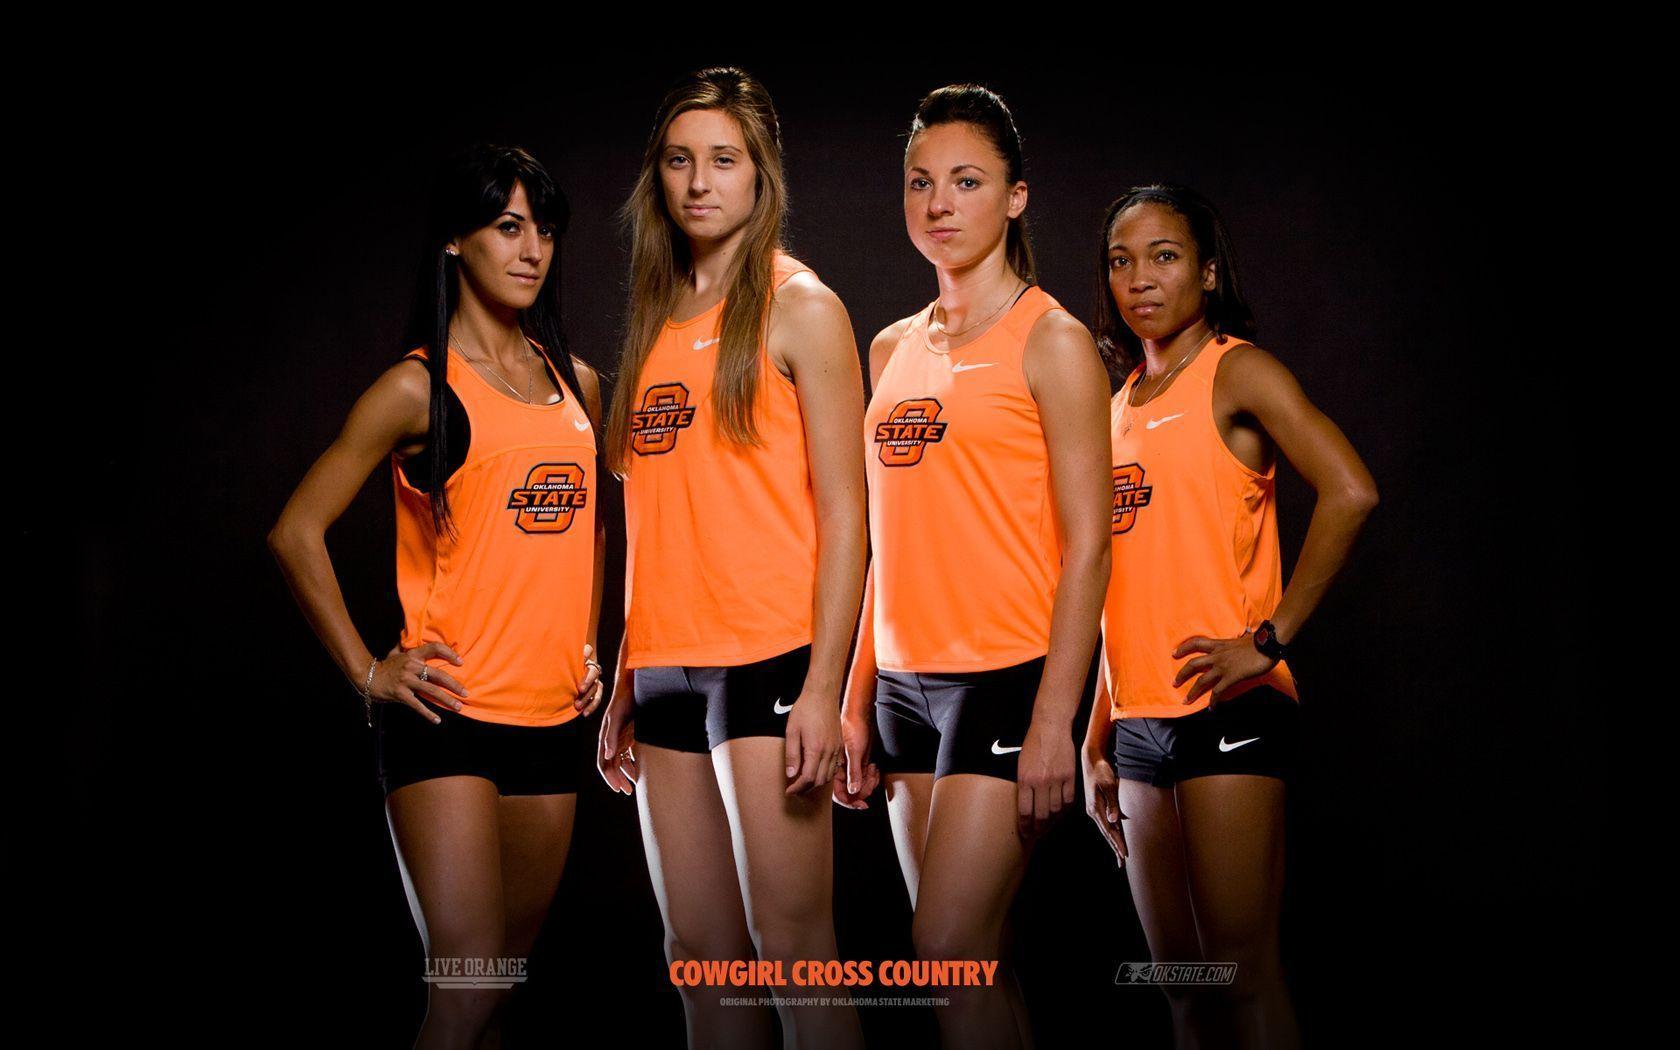 Oklahoma State Official Athletic Site&;s Cross Country